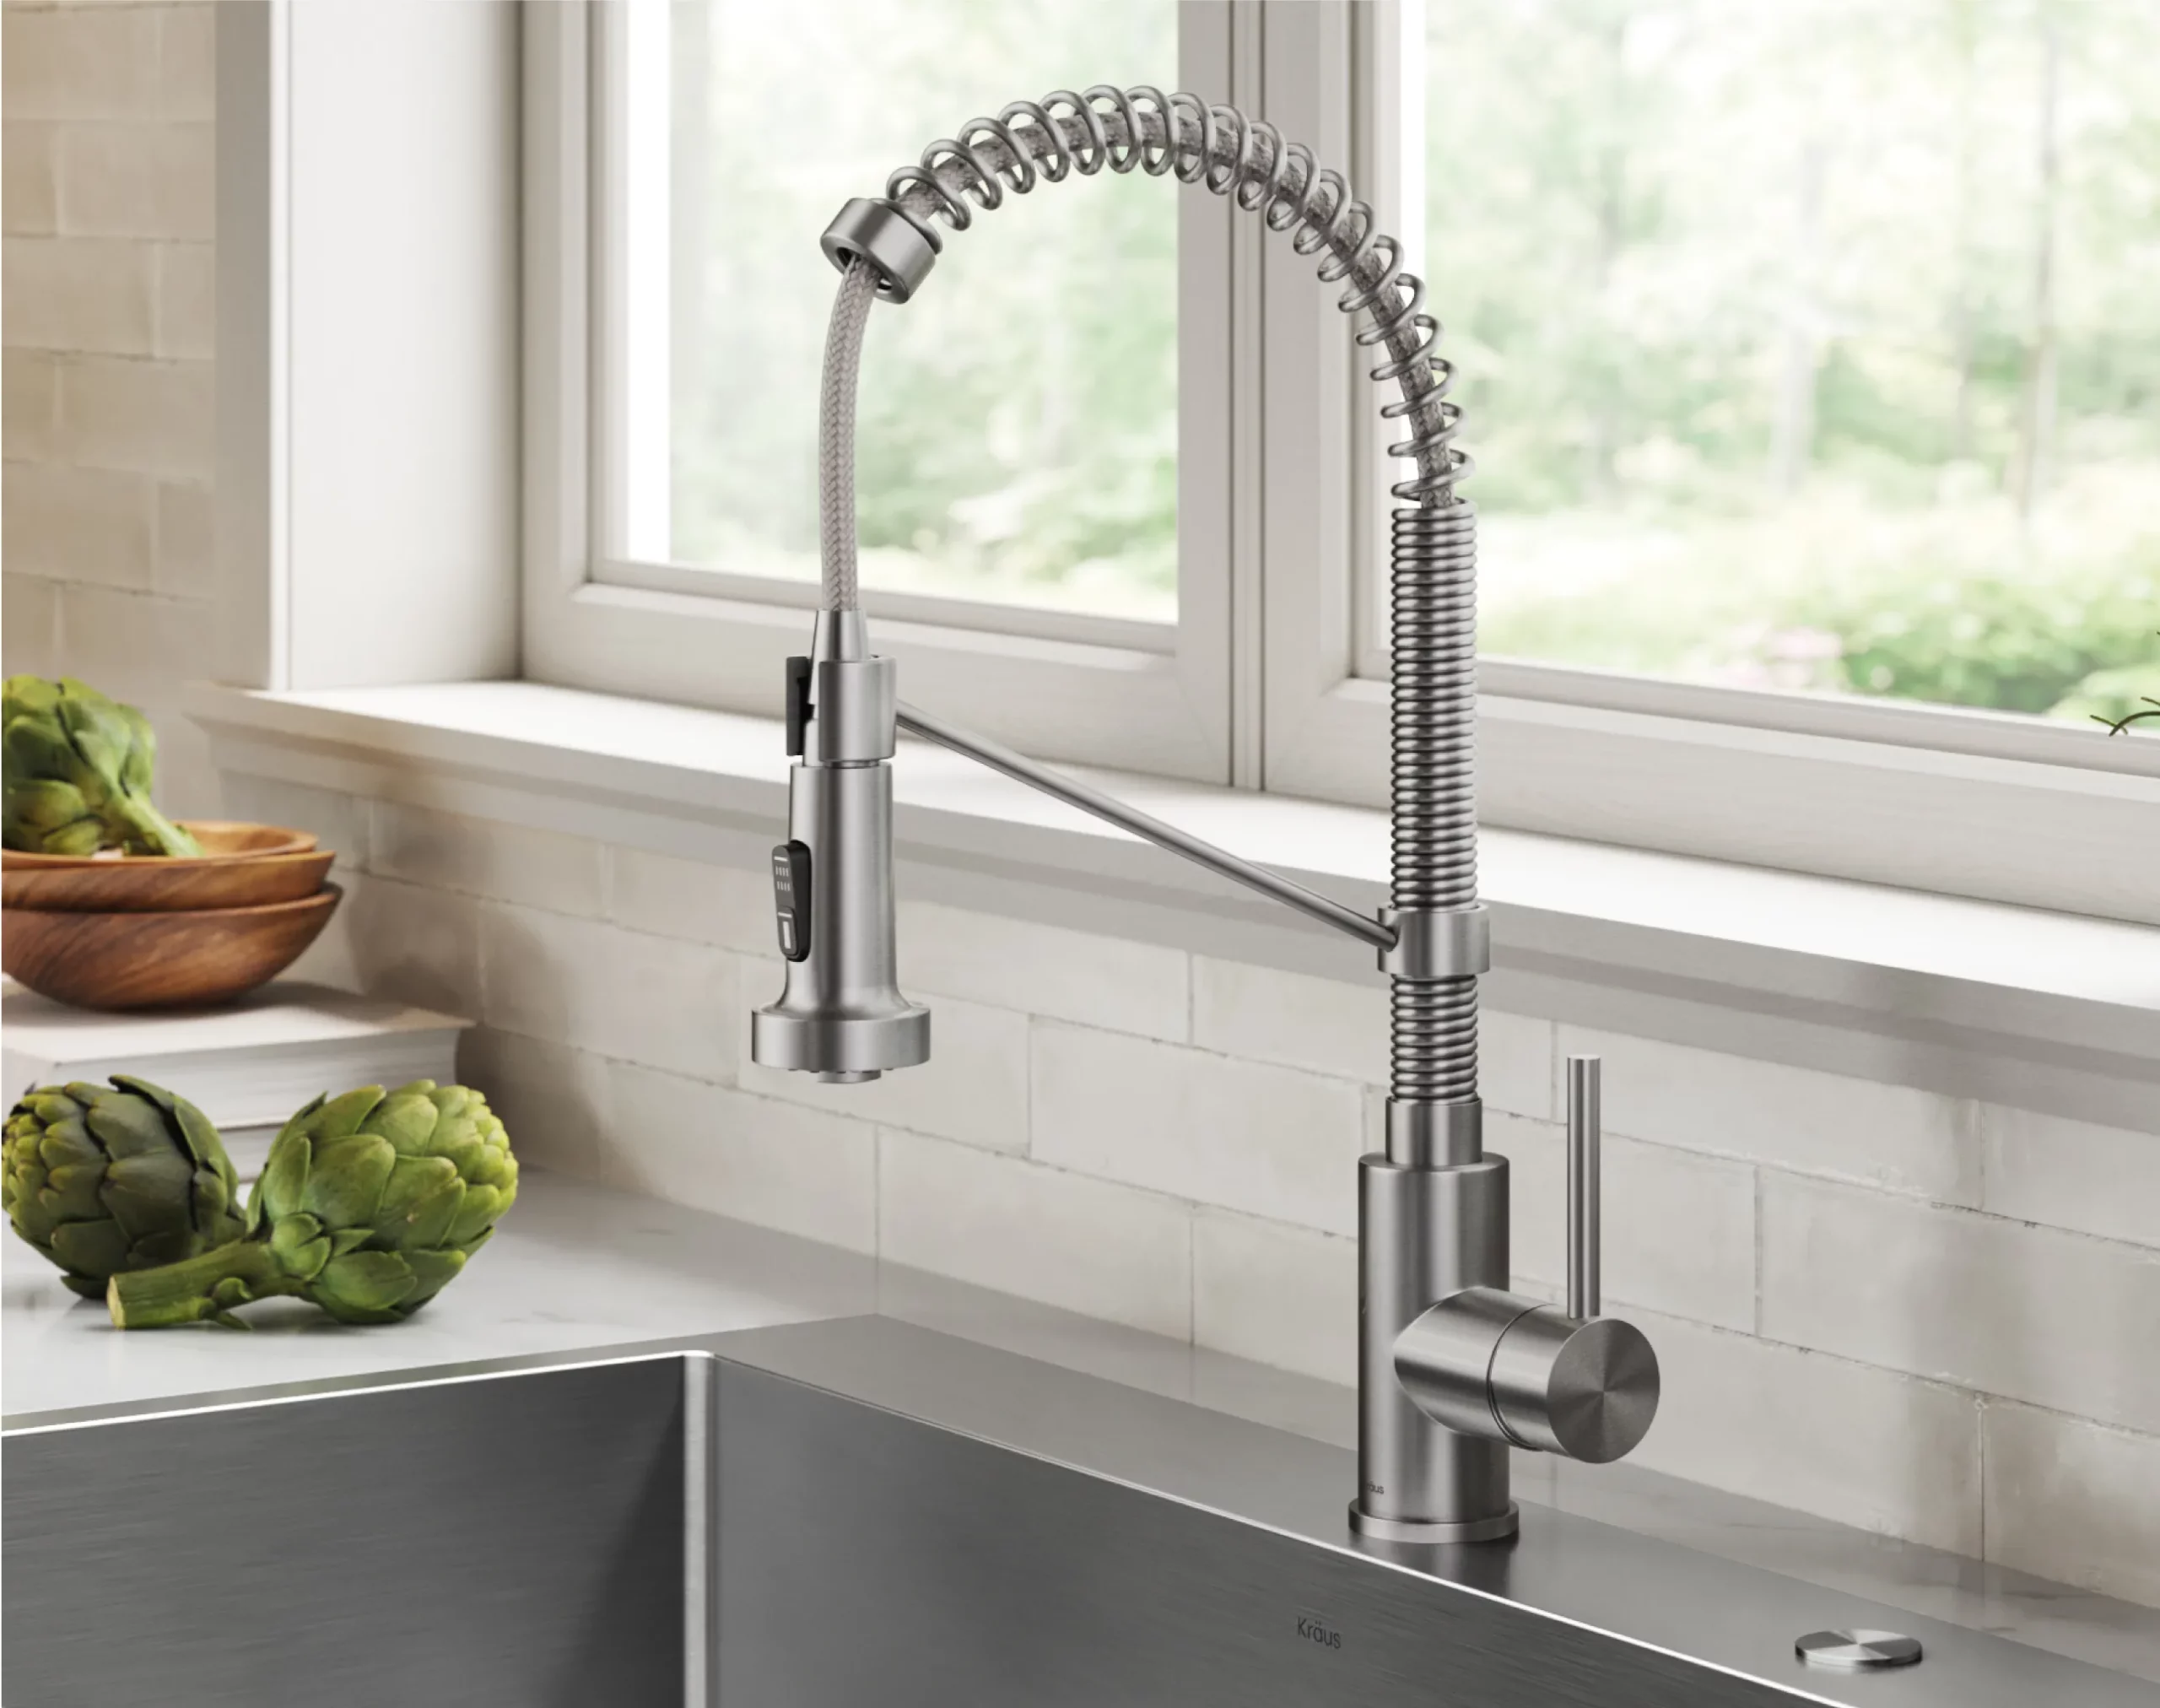 Glacier Bay Faucets Reviews: Top Picks and Buying Guide